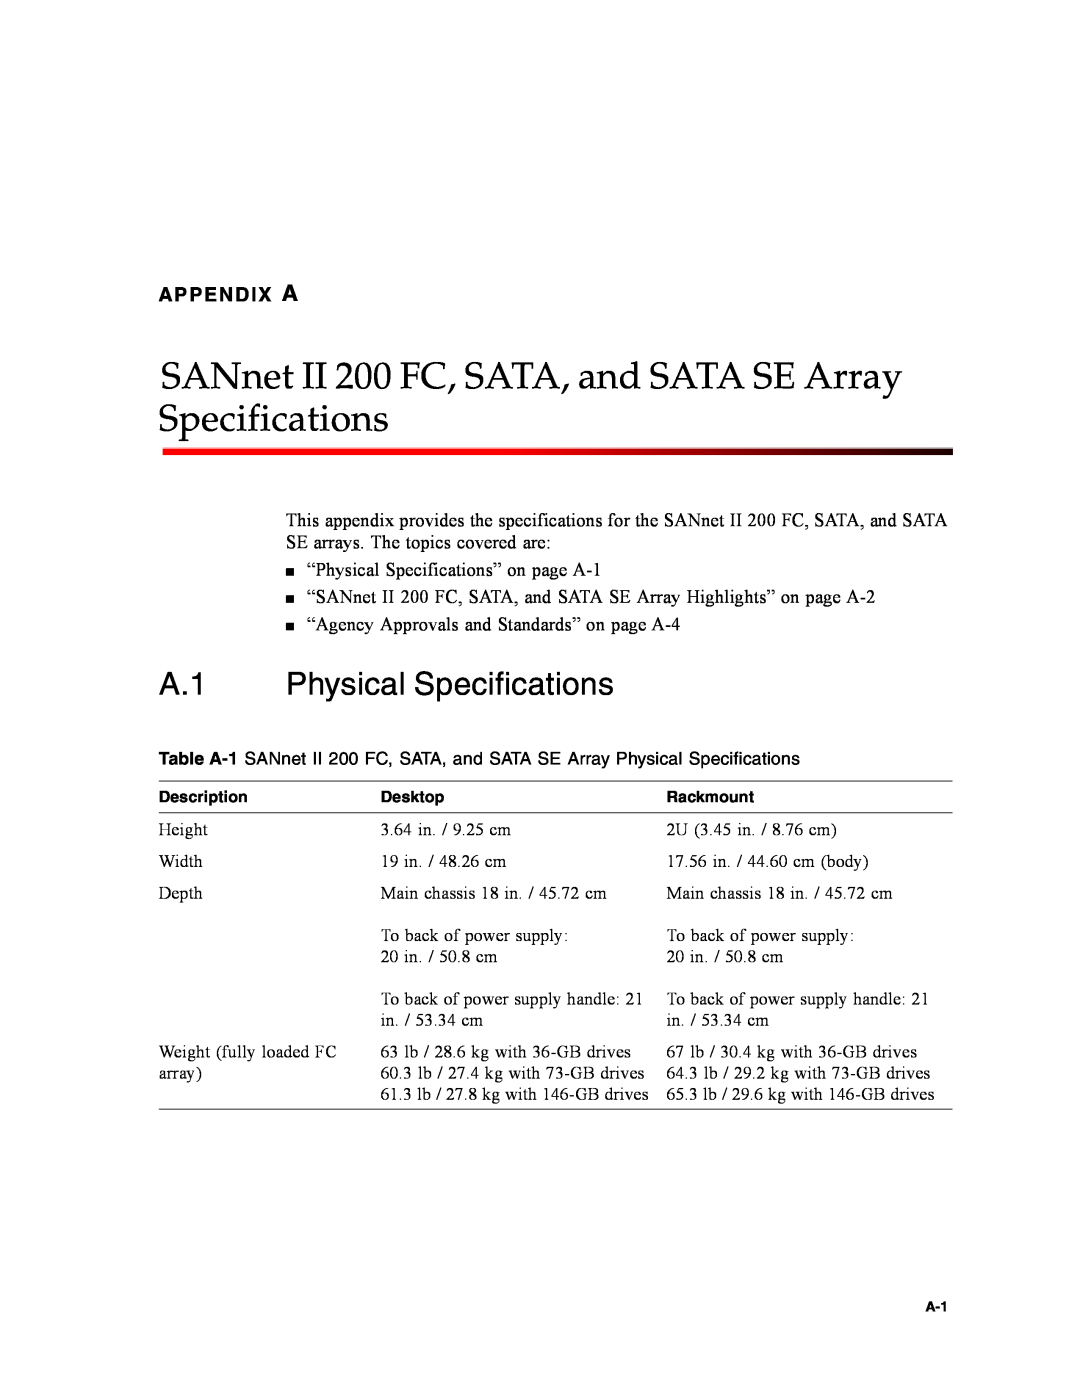 Dot Hill Systems SANnet II 200 FC, SATA, and SATA SE Array Specifications, A.1 Physical Specifications, Appendix A 